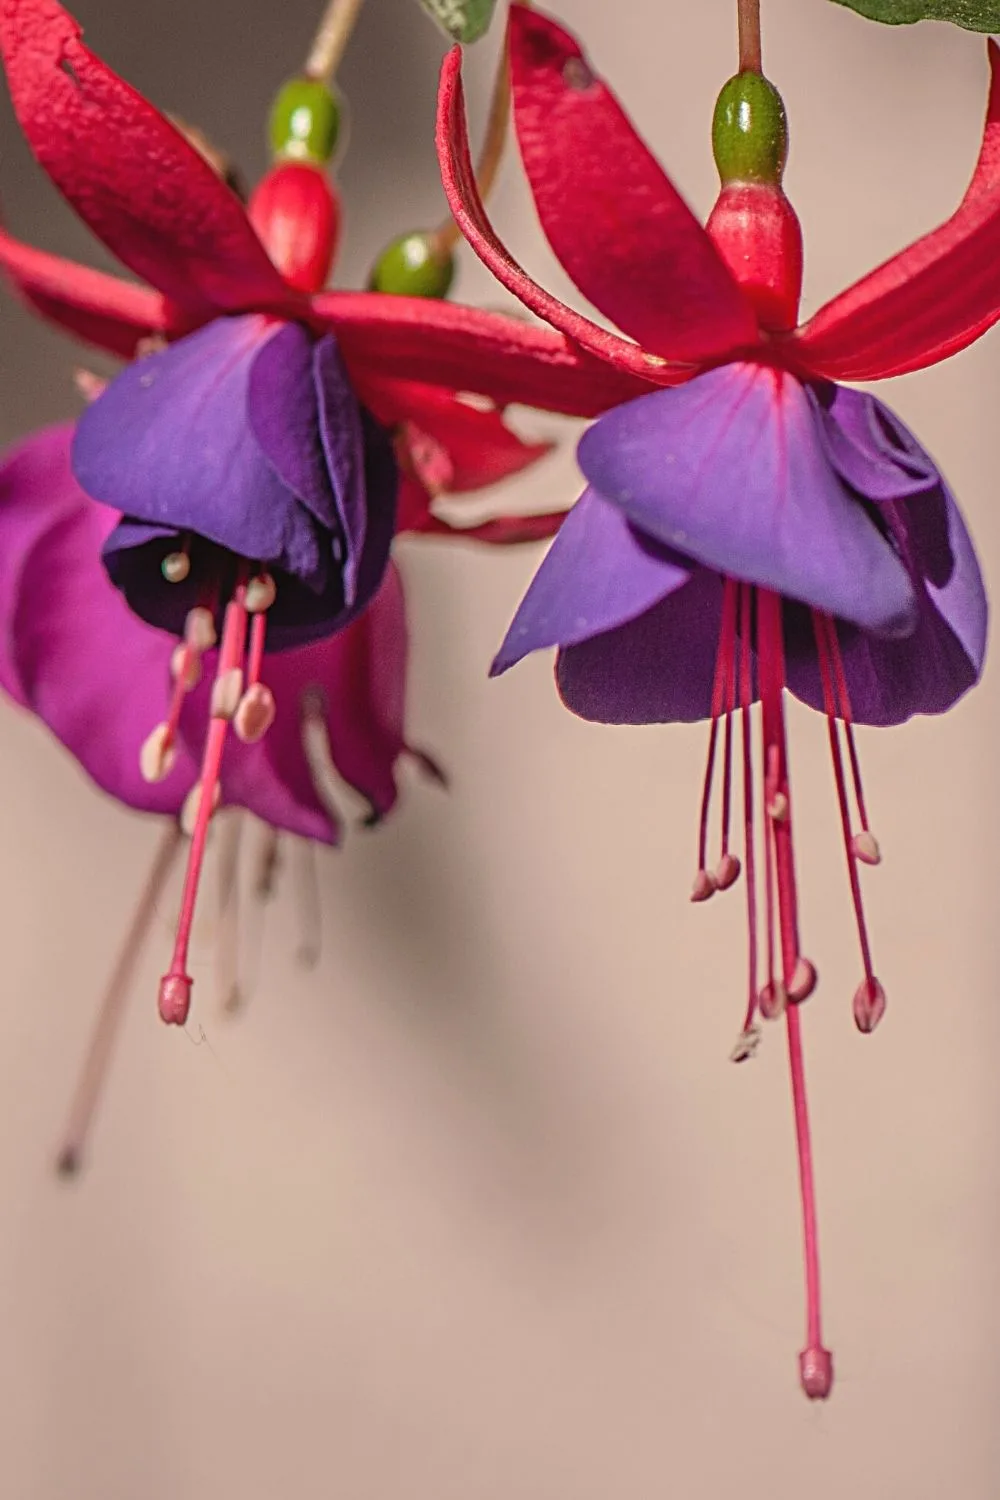 Fuchsia is another colorful plant you can grow in the north-facing side of the house